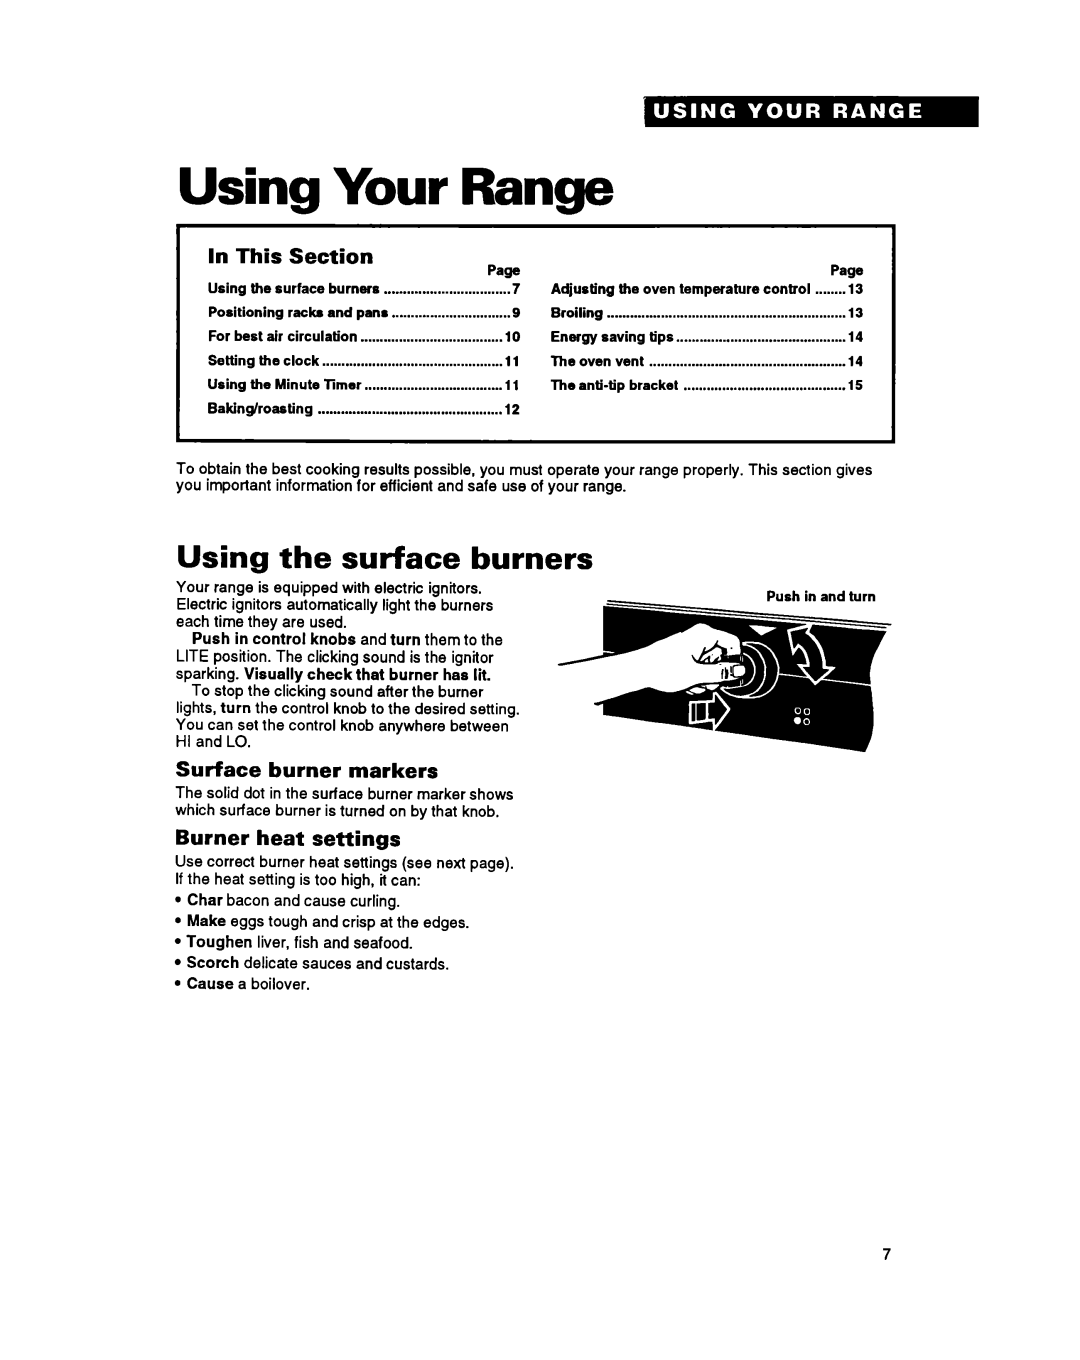 Whirlpool FGC355Y, FGP355Y Using Your Range, Using the, surface, burners, In This, Section, Surface burner markers, Page 